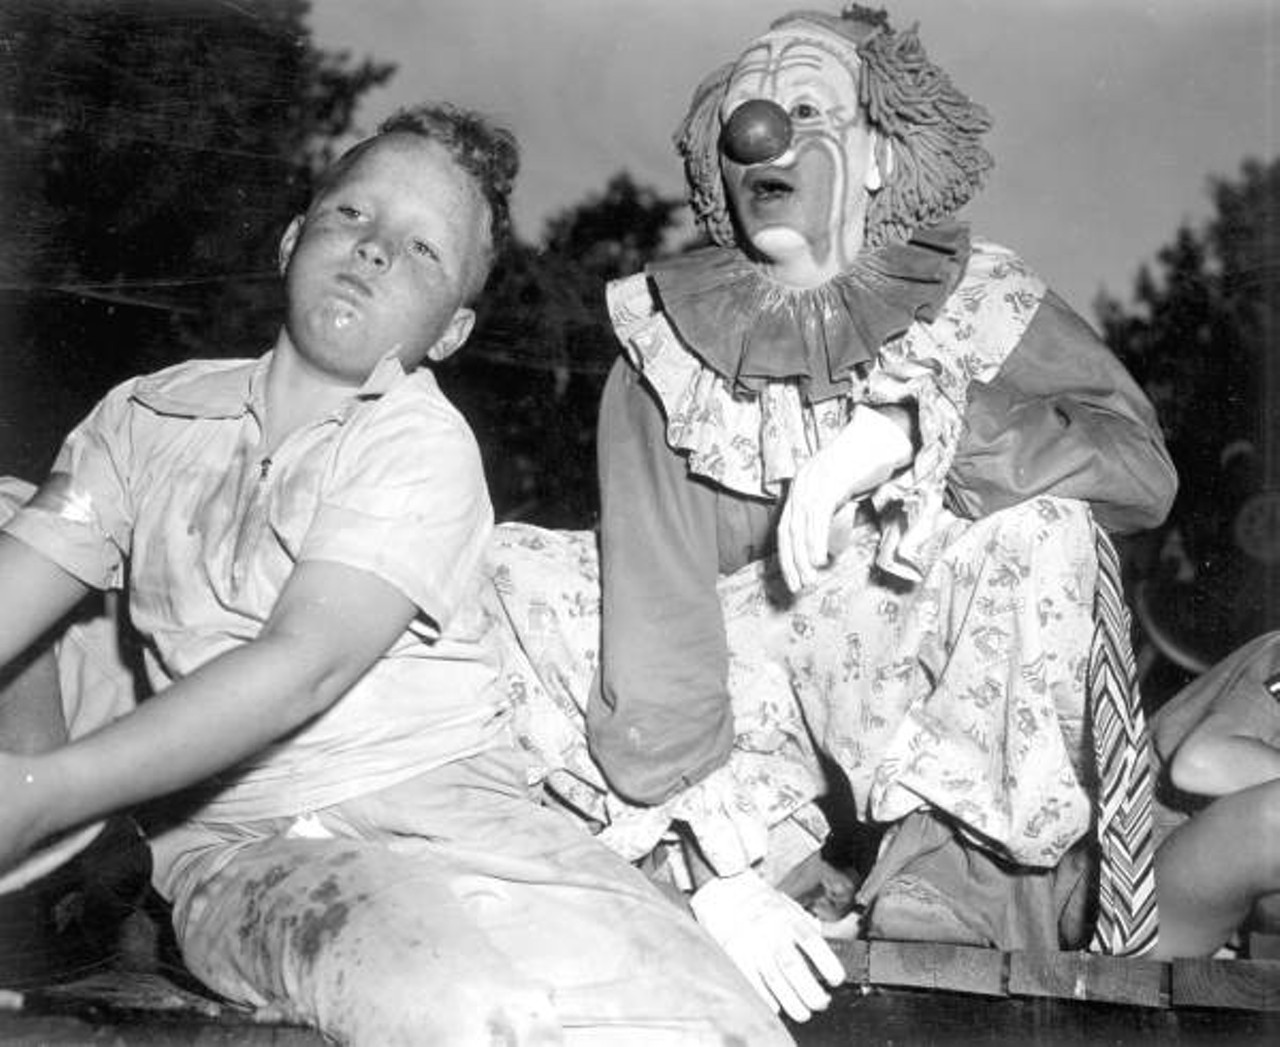 A boy and a clown at a watermelon-eating contest in Leesburg circa 1951 (via floridamemory.com)